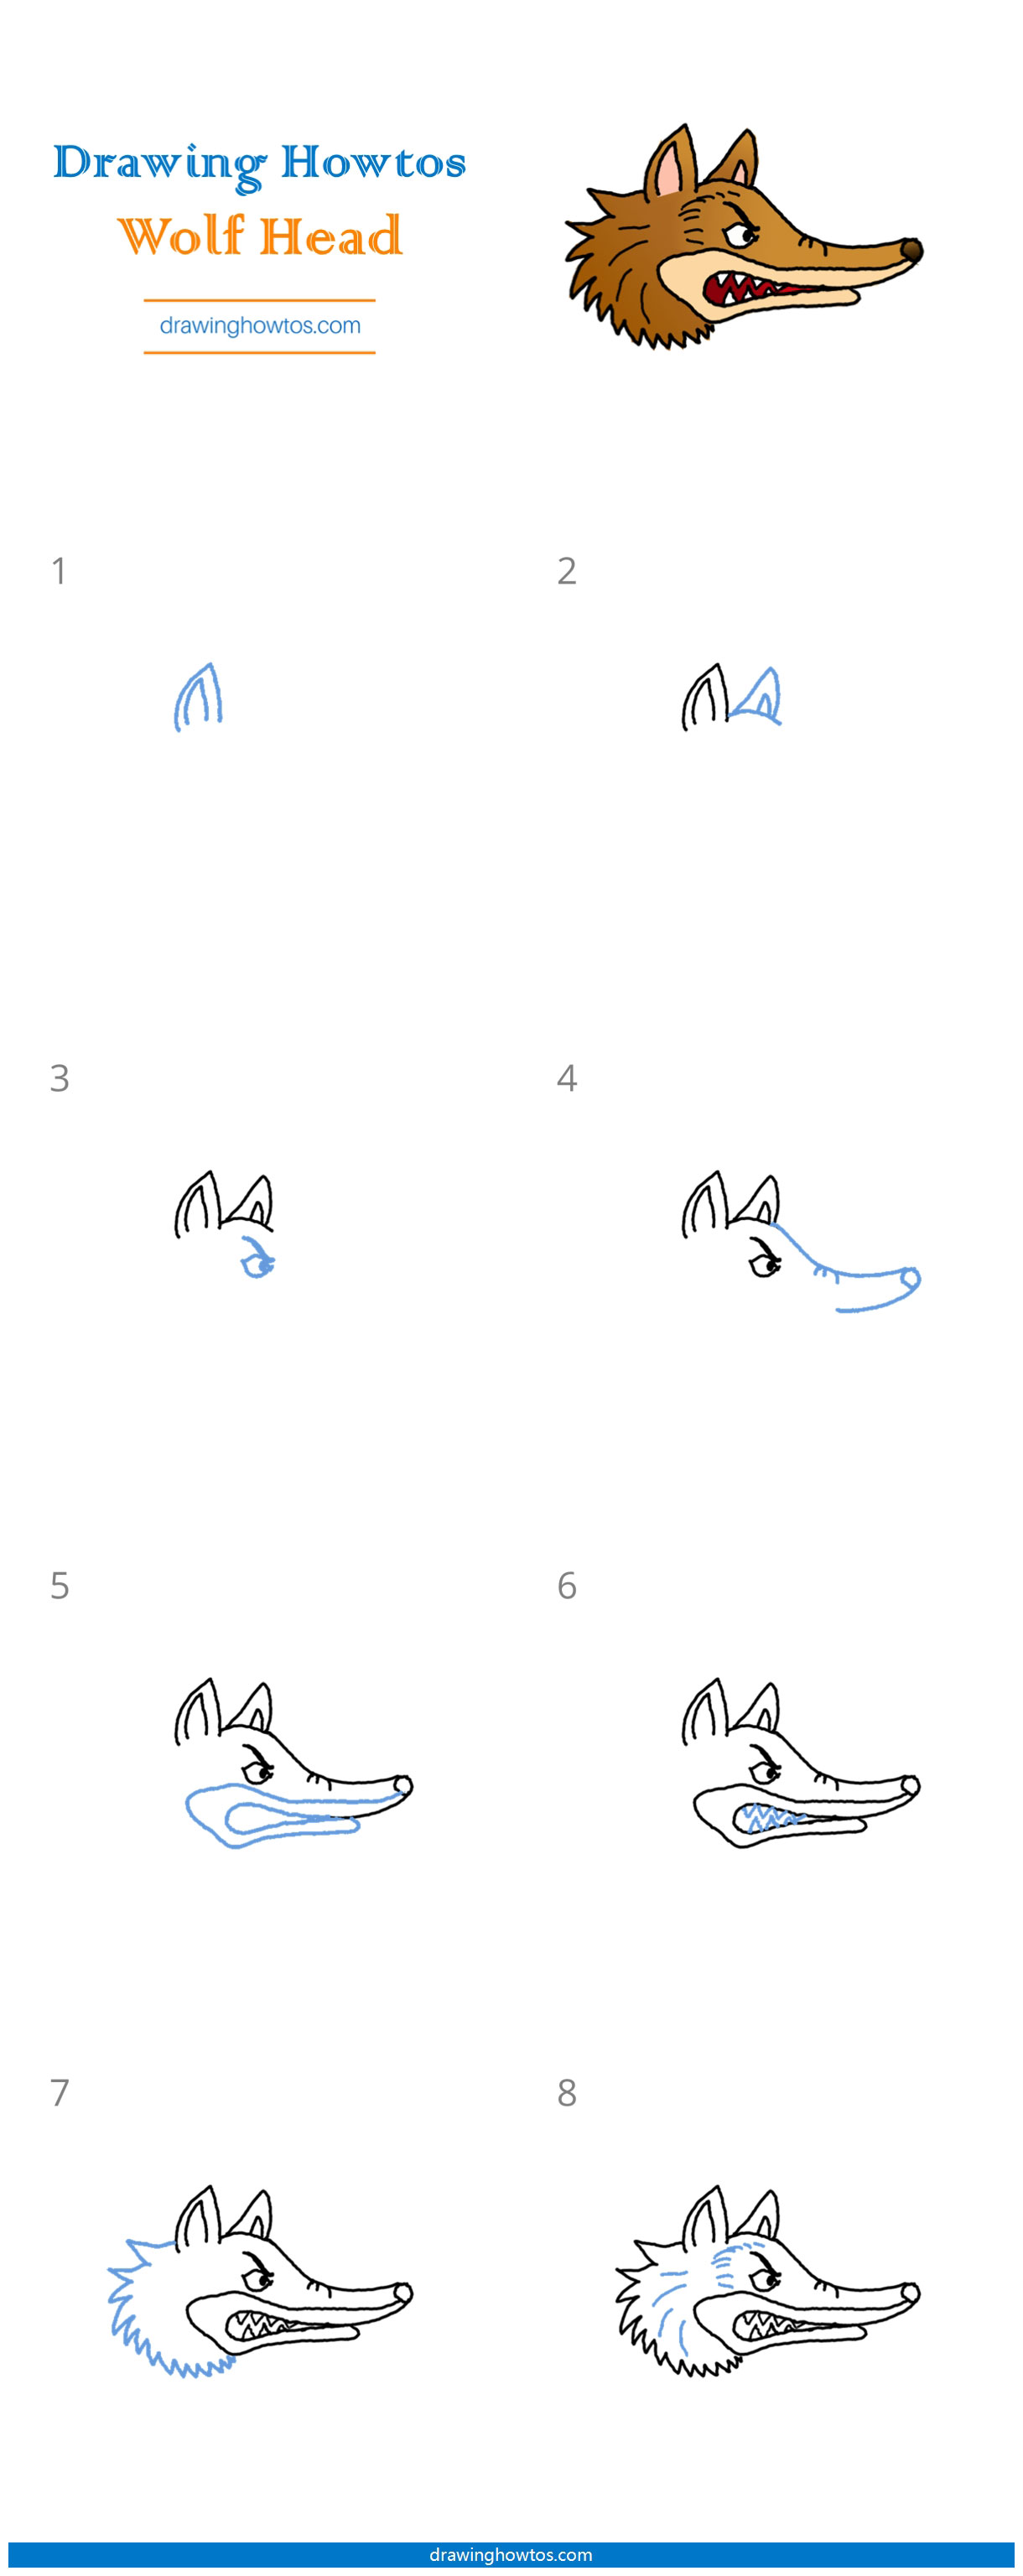 How to Draw a Wolf Head Step by Step